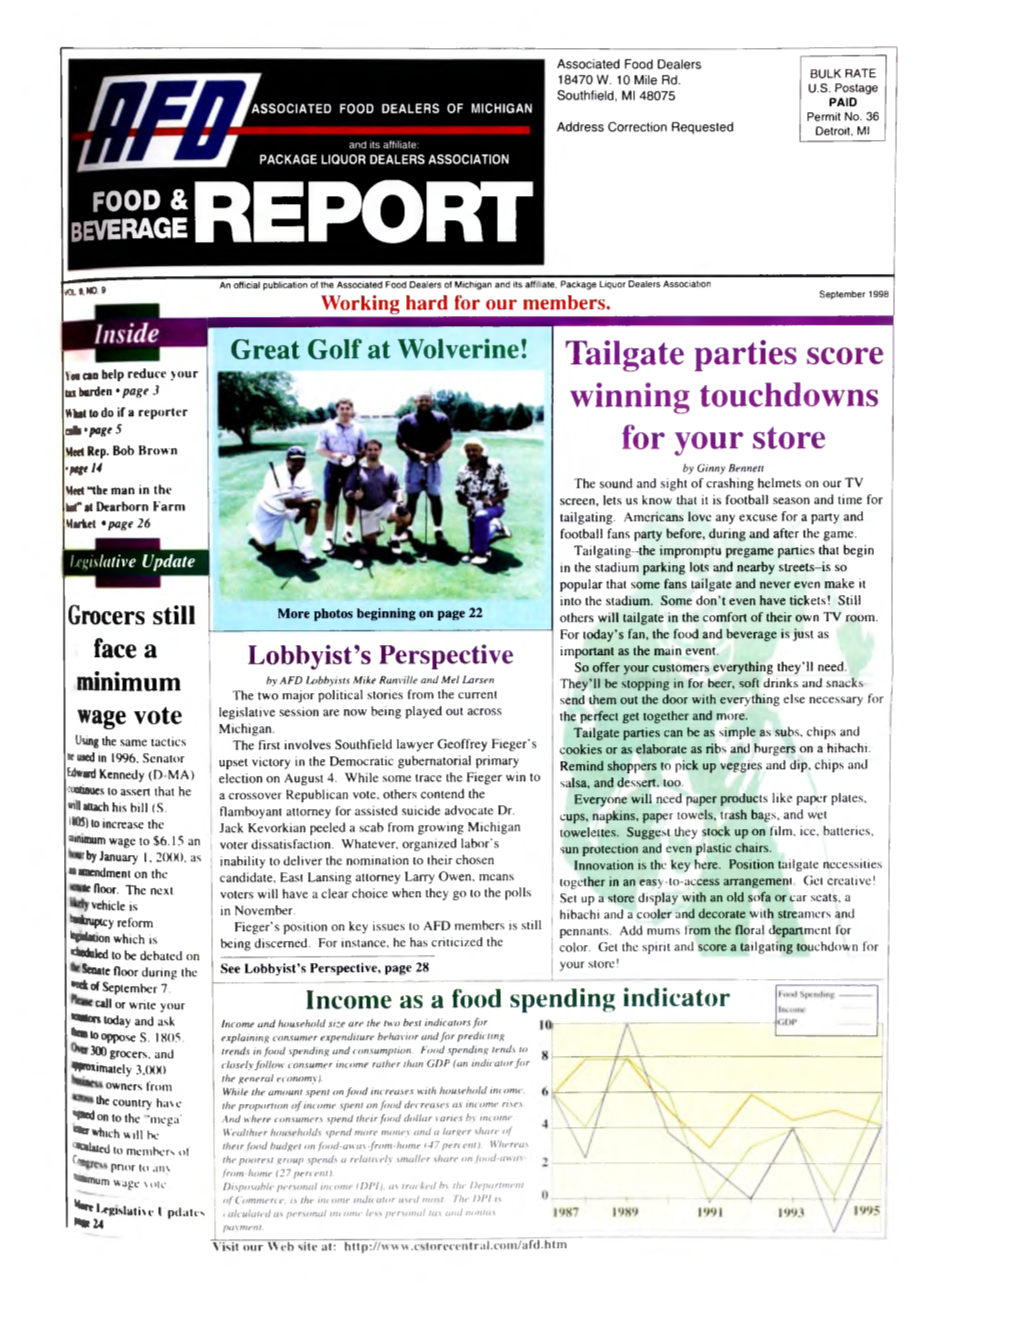 REPORT Iol9.NO 9 an Official Publication of the Associated Food Dealers of Michigan and Its Affiliate, Package Liquor Dealers Association Working Hard for Our Members